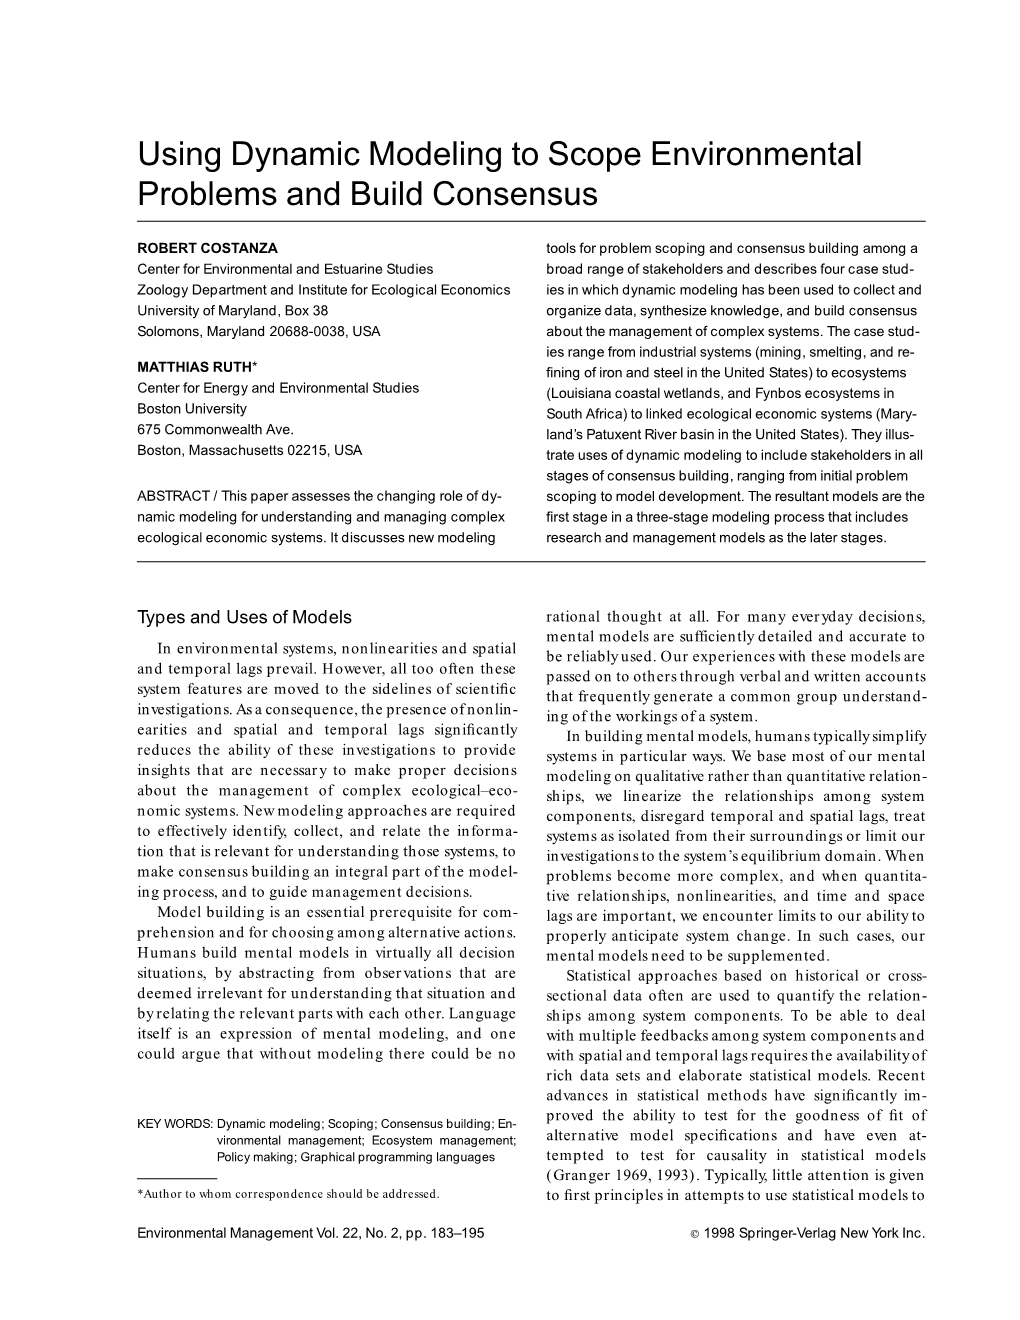 Using Dynamic Modeling to Scope Environmental Problems and Build Consensus